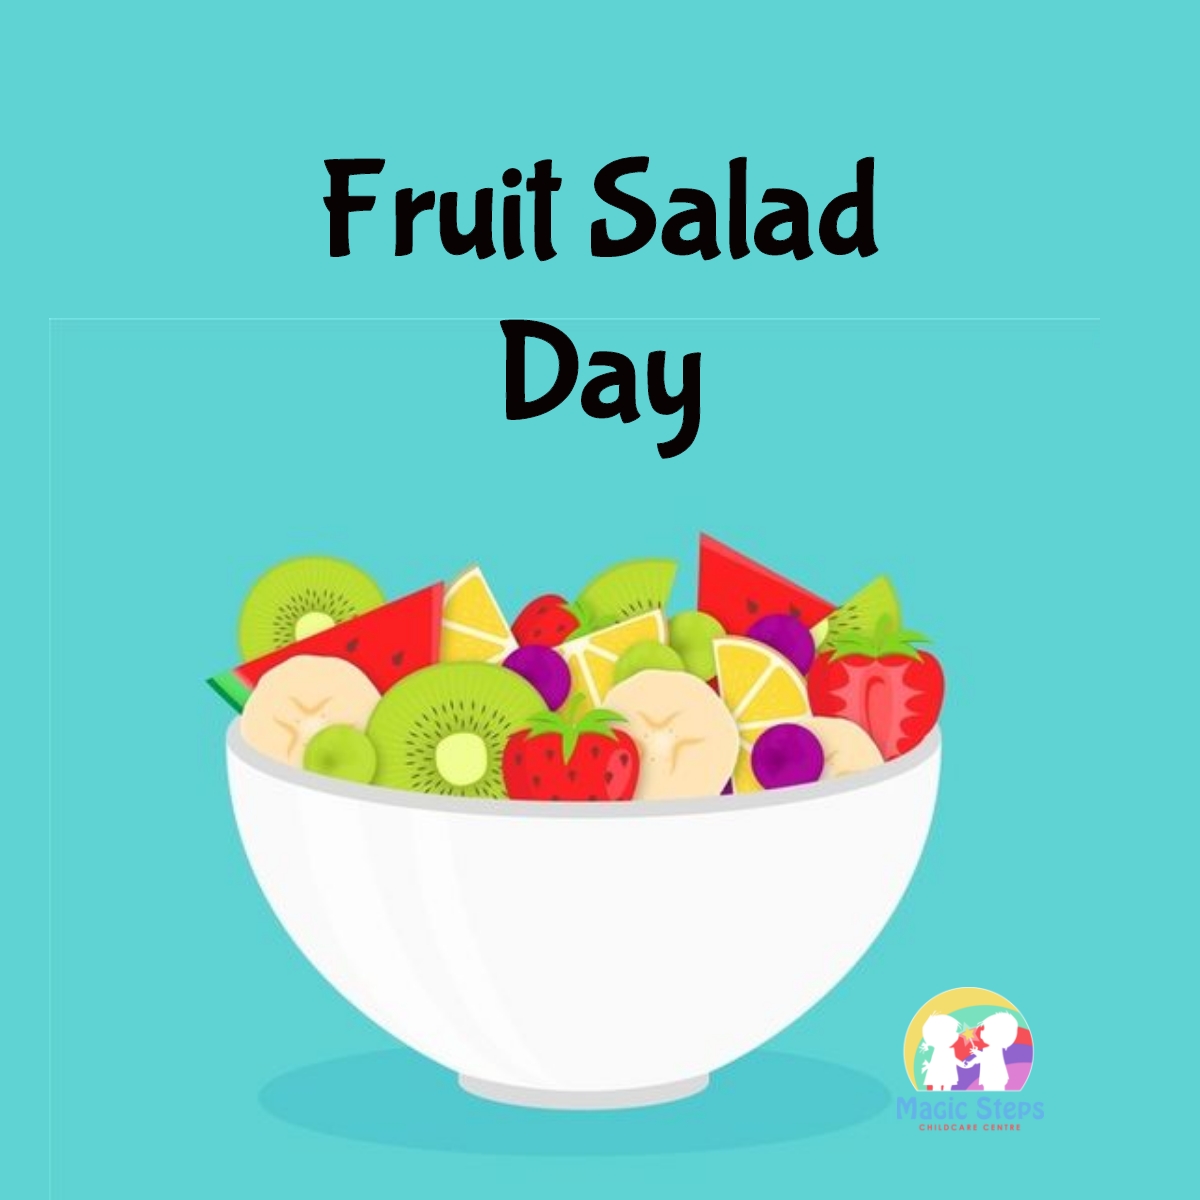 Fruit Salad Day- Monday 25th August